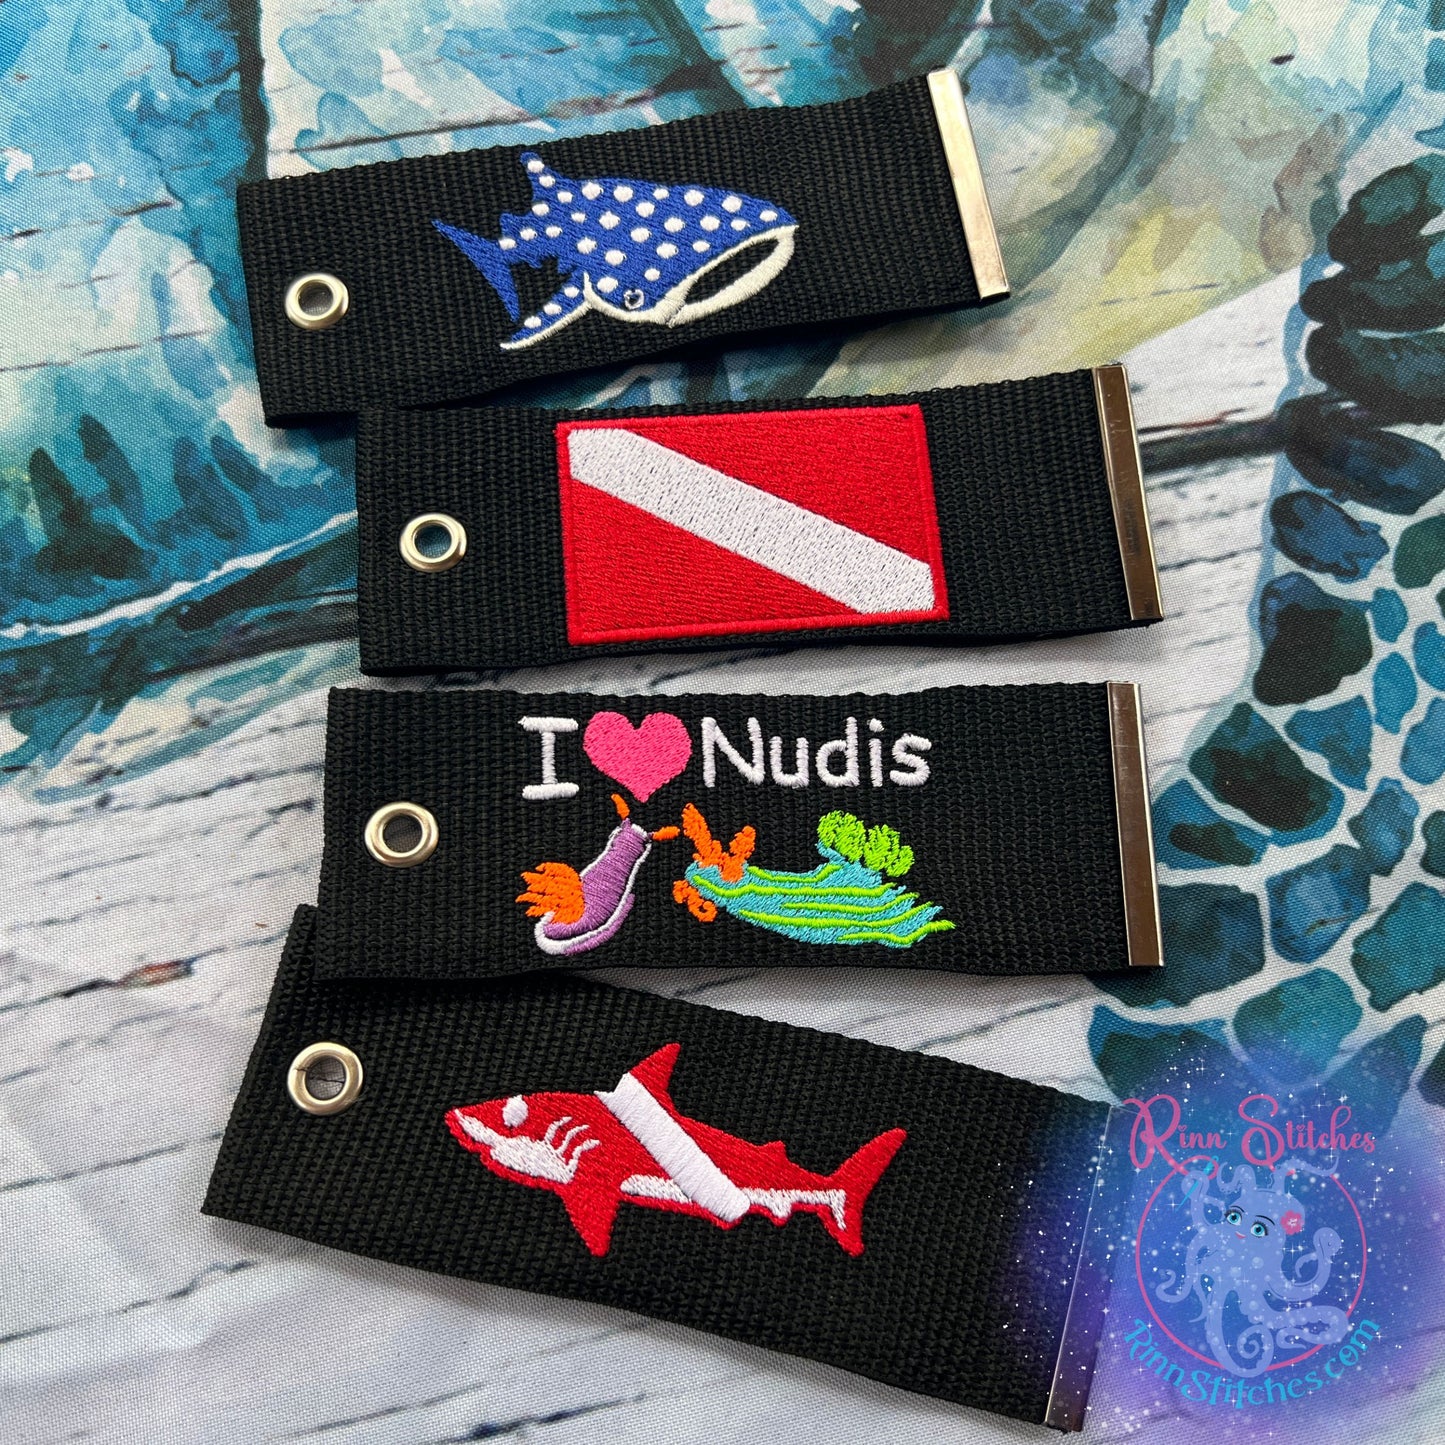 Luggage Tag, Gear Bag Tag, Scuba Diving Bag Tags - Choose any design on our site | Embroidered ID Tags for all your travel needs